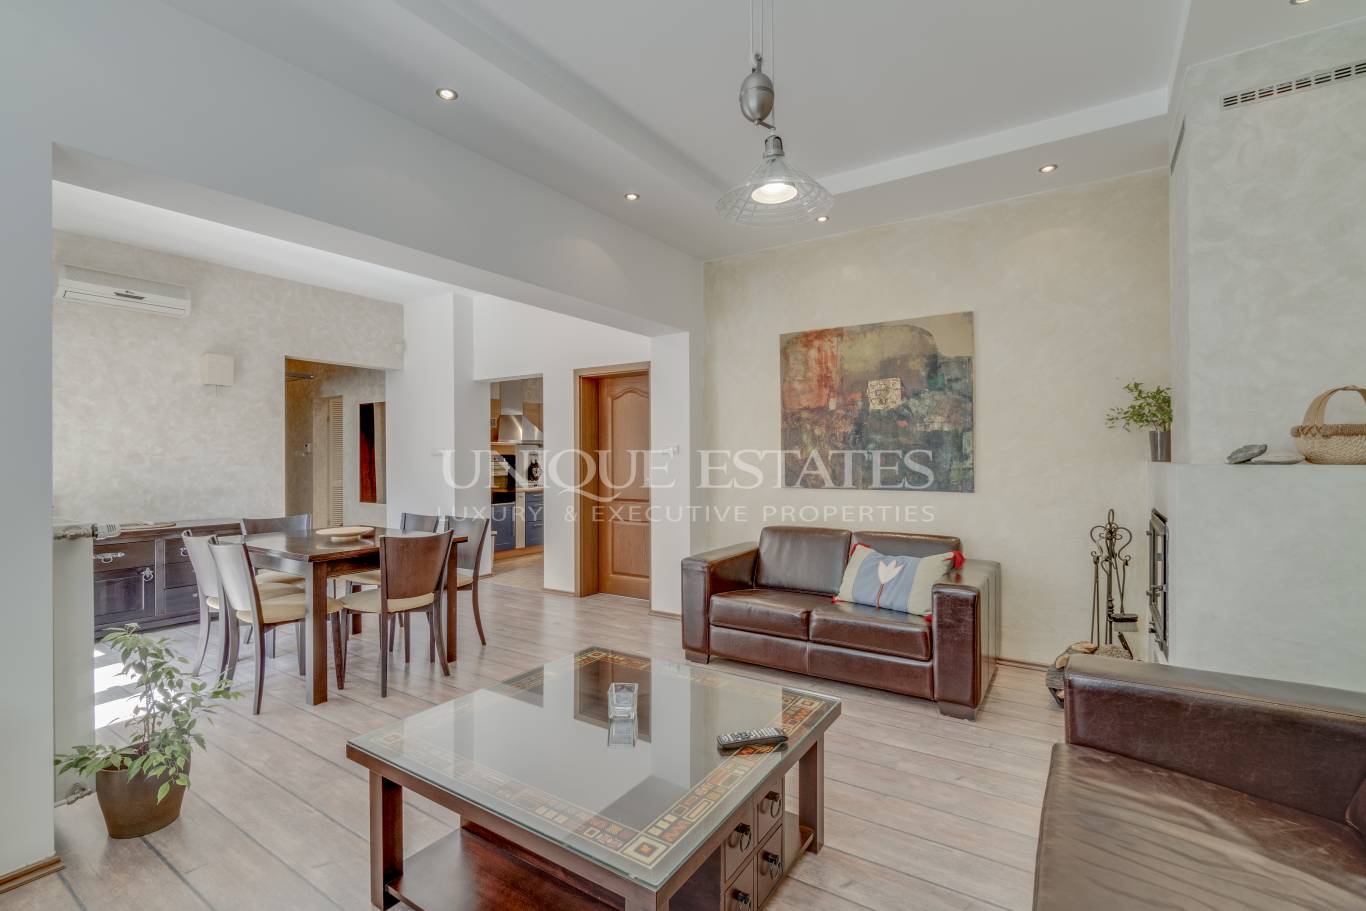 Apartment for rent in Sofia, Downtown with listing ID: K12127 - image 1